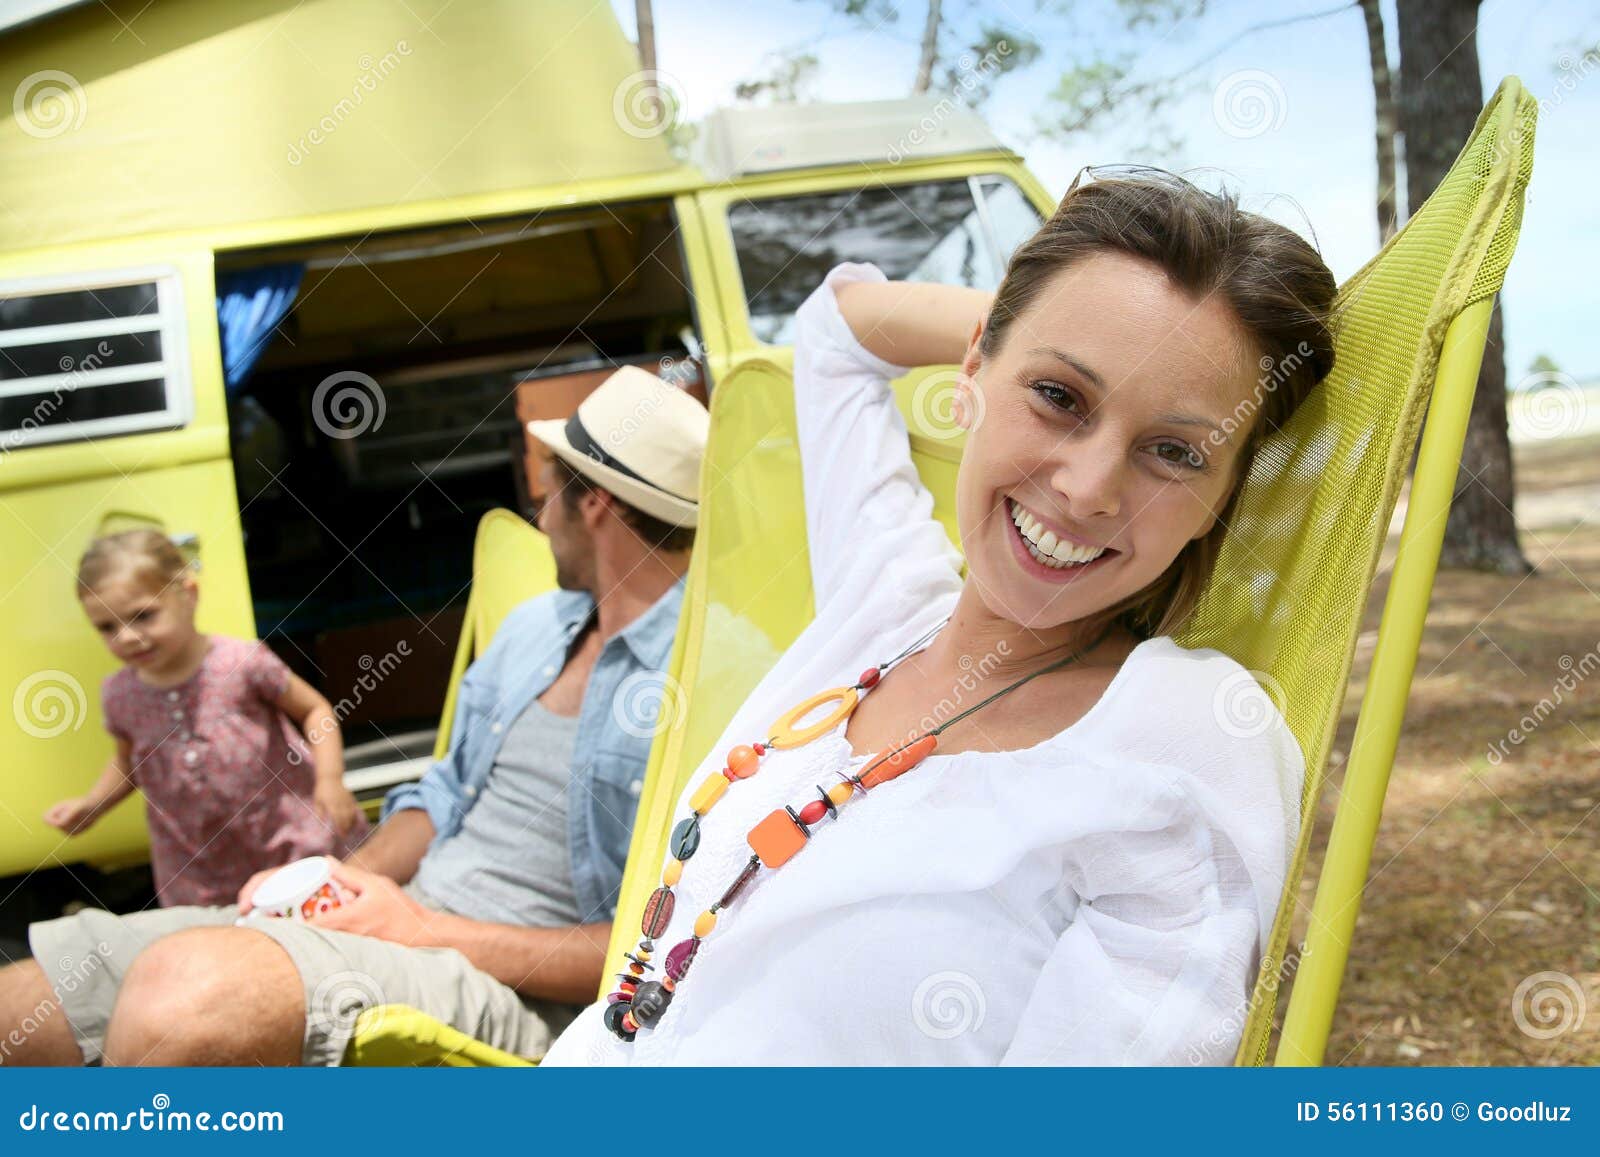 Cheerful Woman Relaxing on Long Chair in Camp Stock Photo - Image of ...